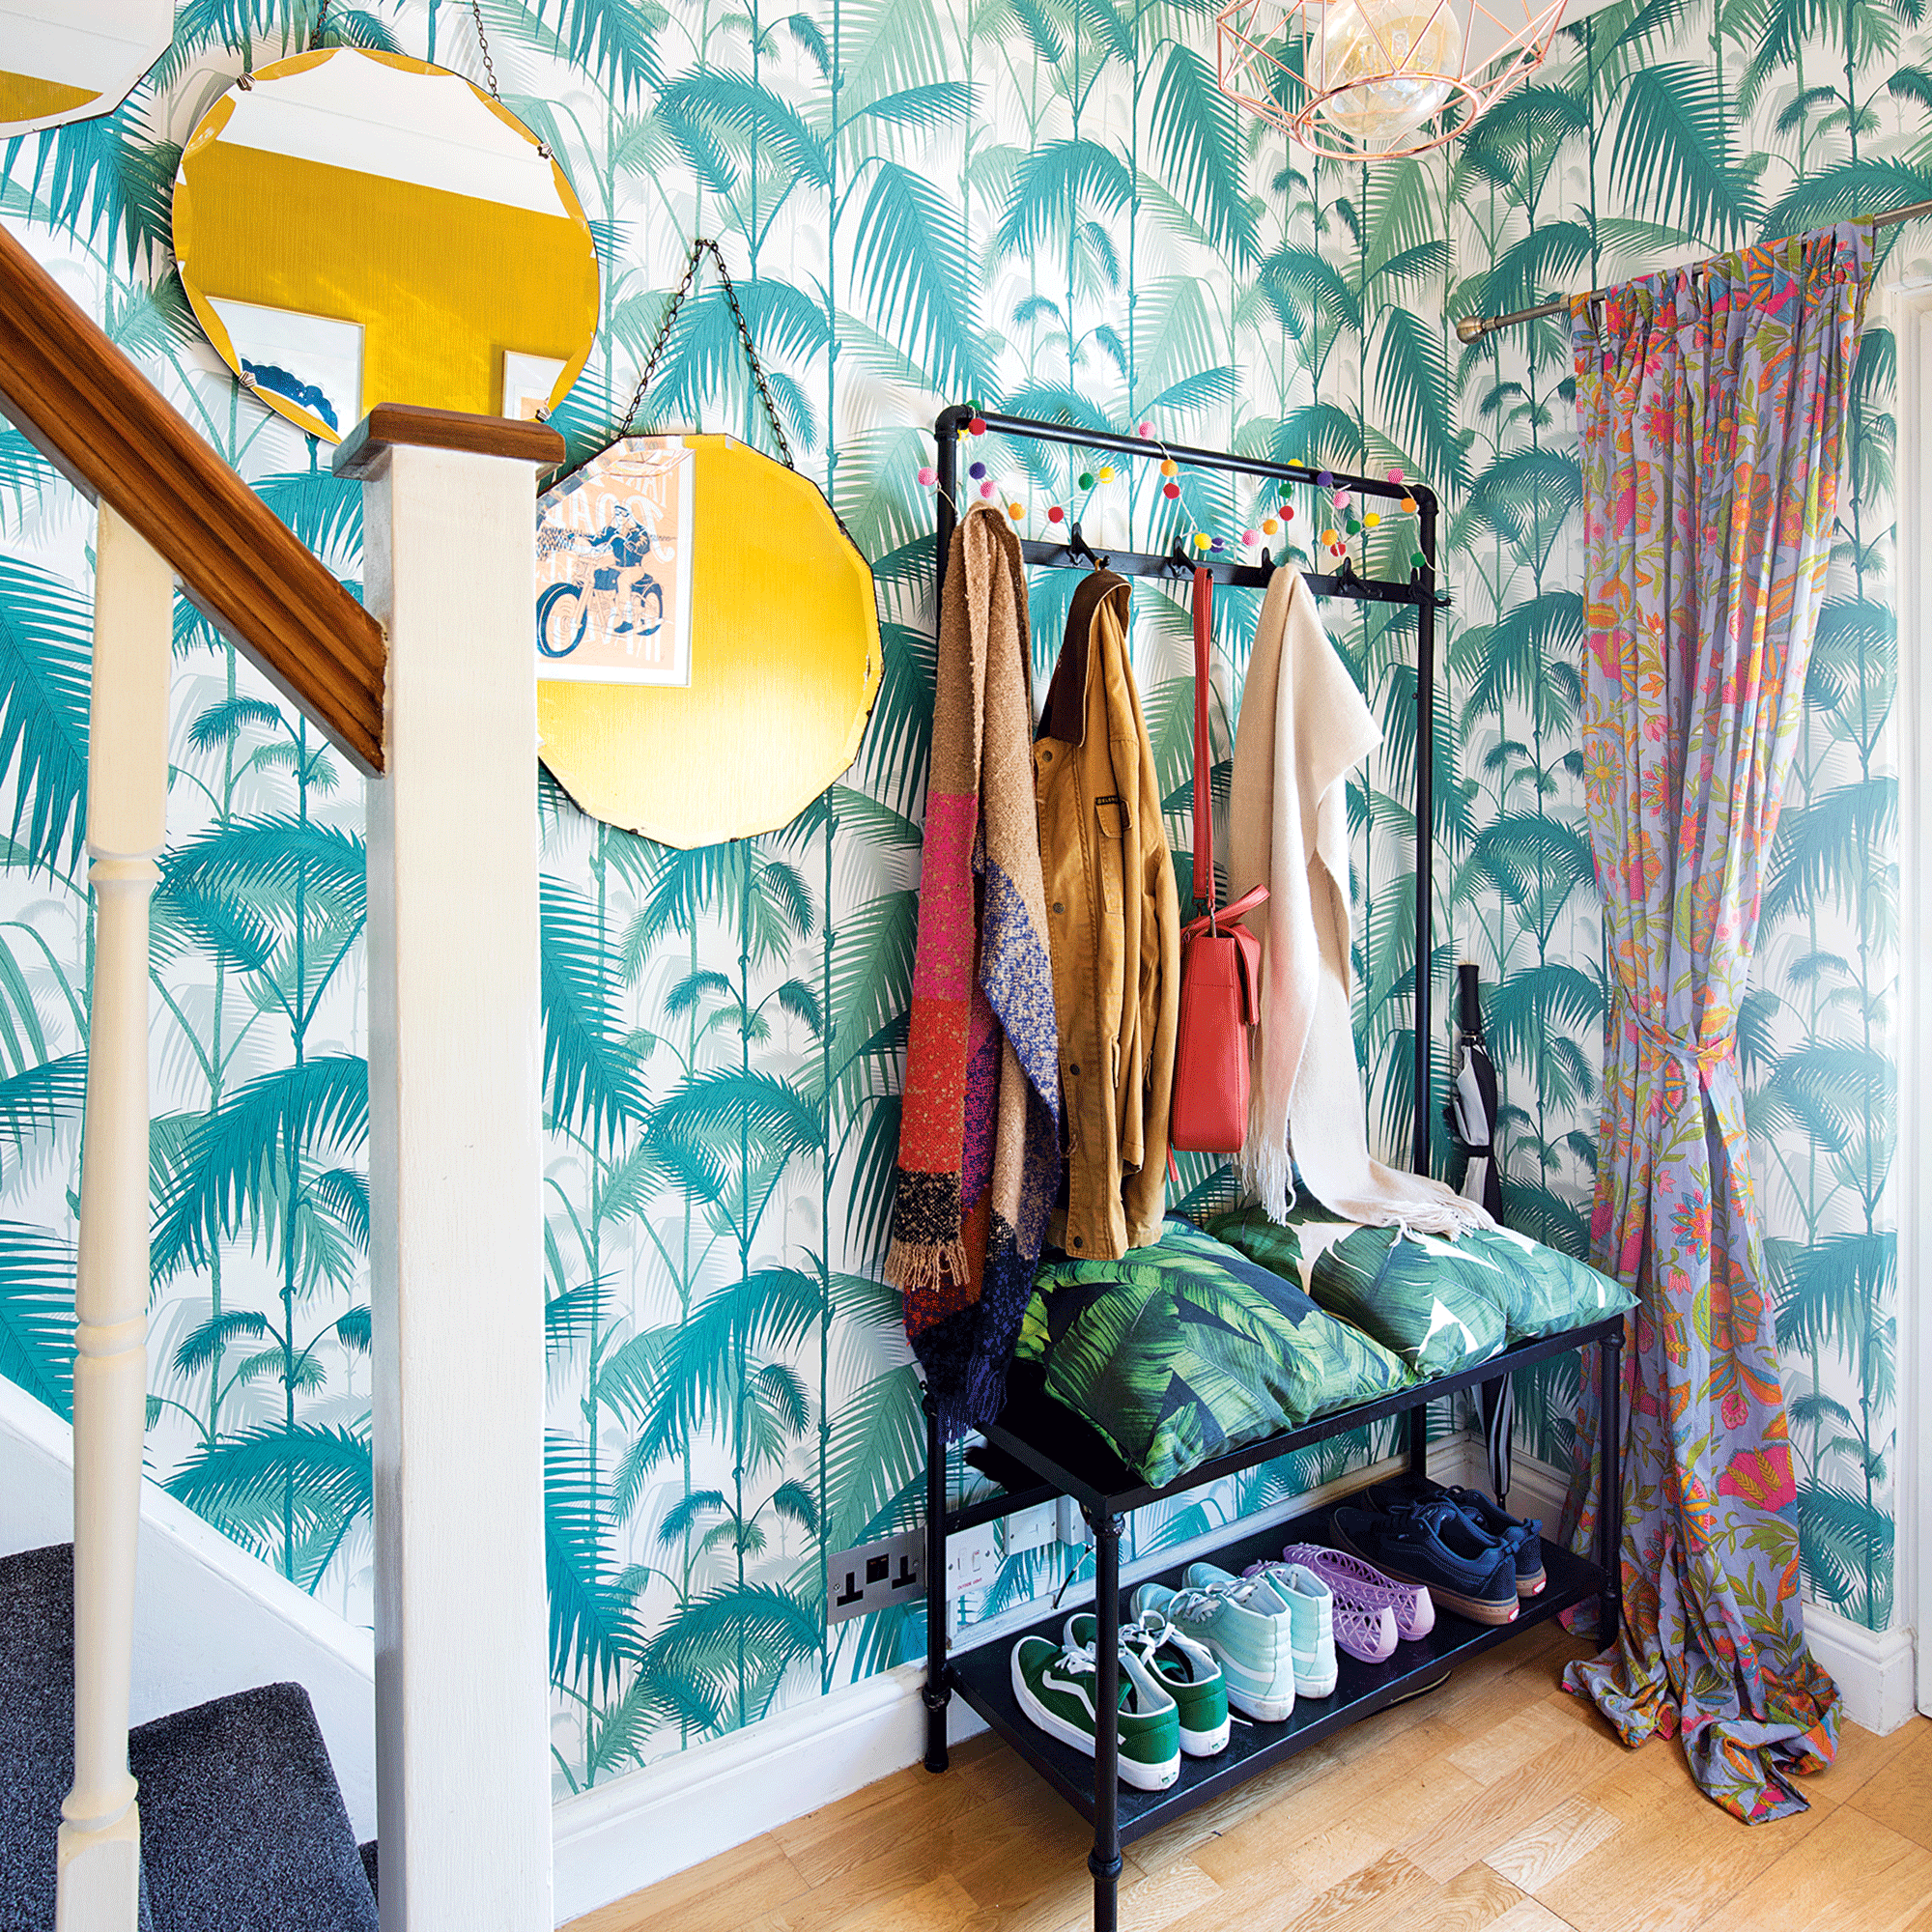 How to organise a hallway and banish the clutter for good